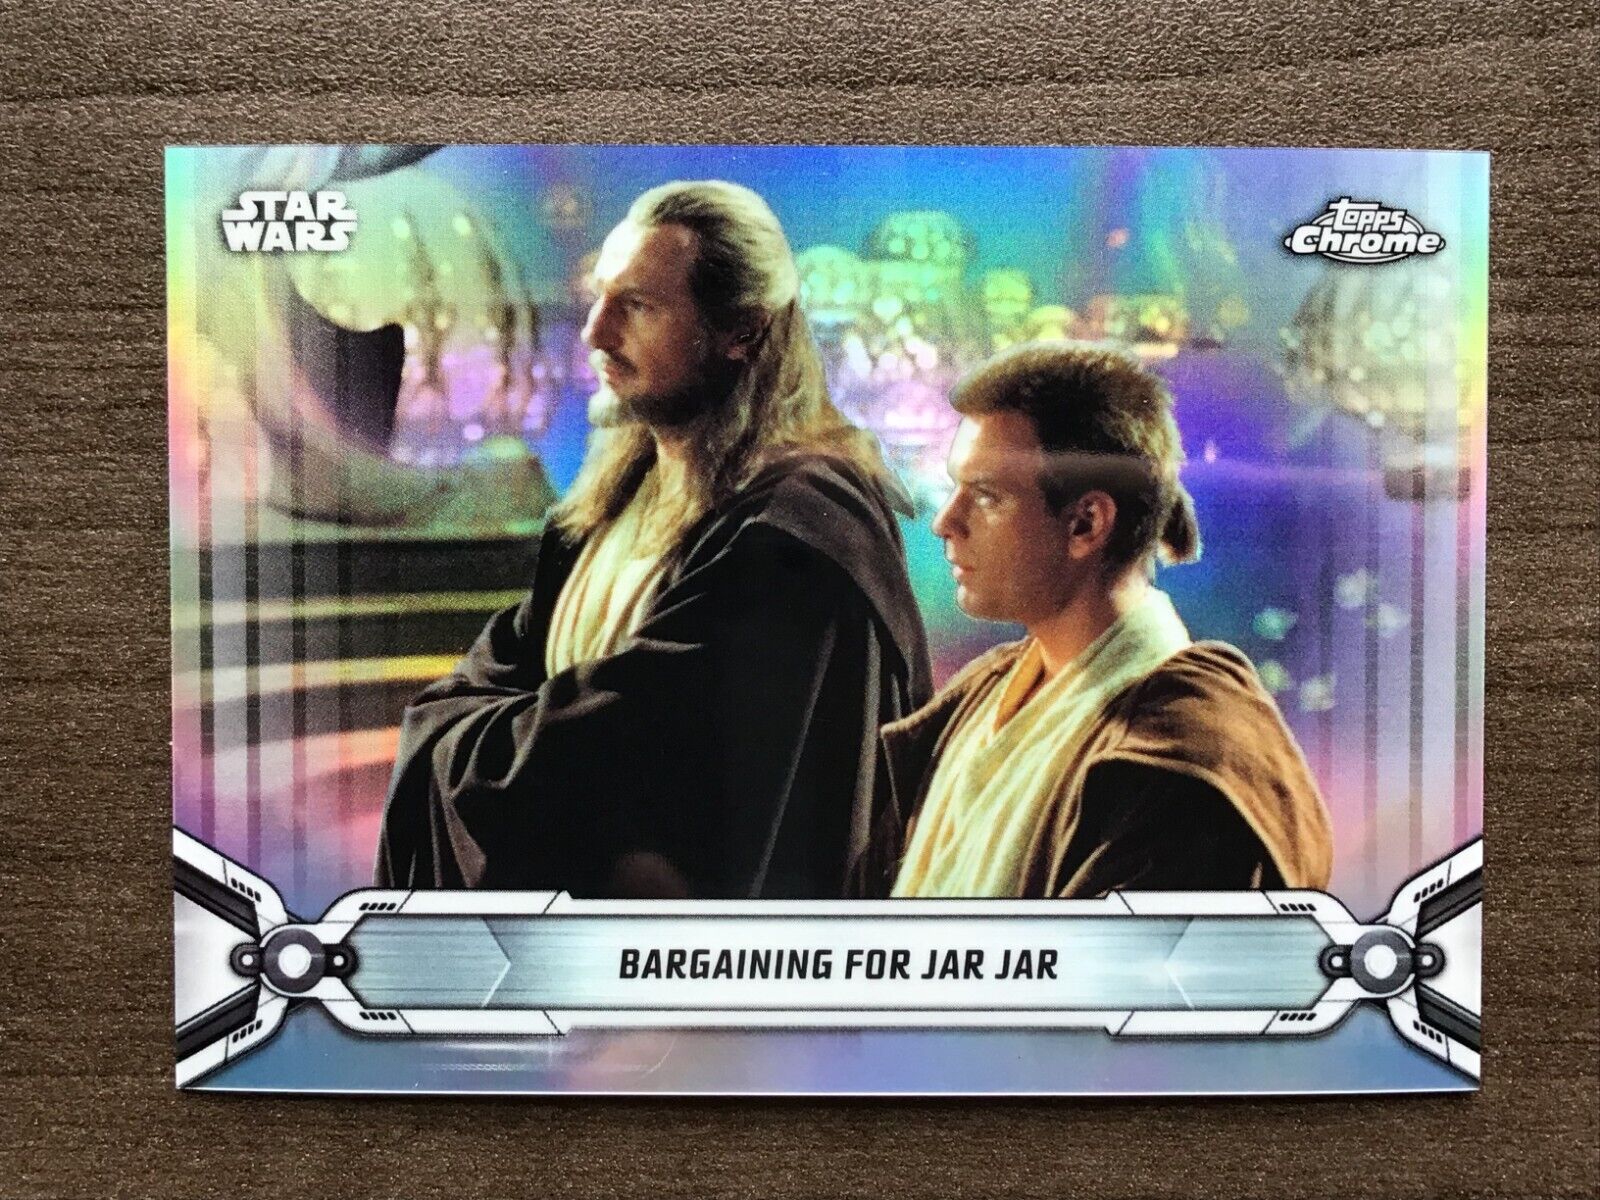 2019 Topps Star Wars Chrome Legacy Base Card Refractor Parallel ~ Pick your Card